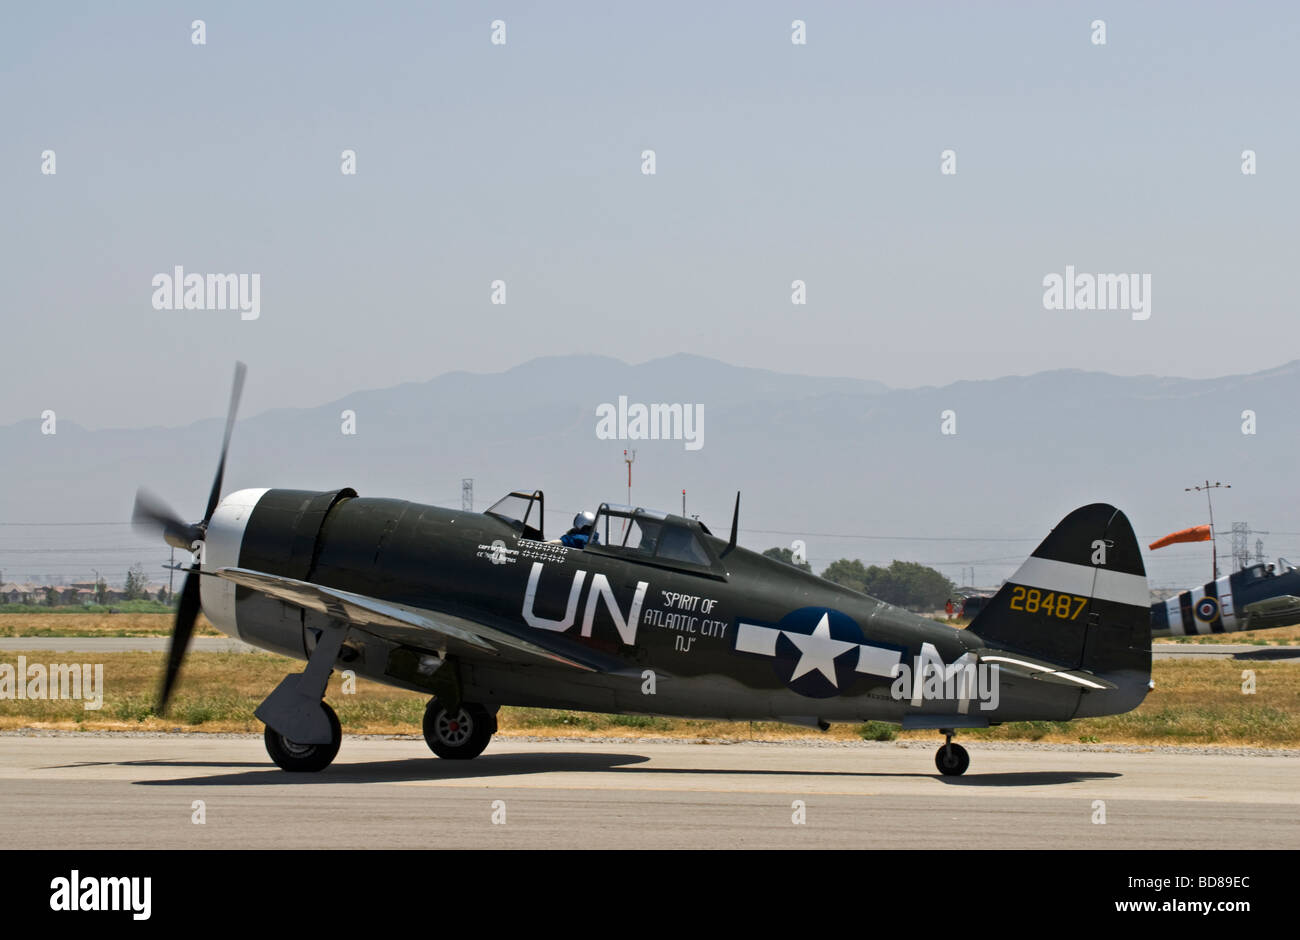 A Republic P-47G Thunderbolt taxis on the runway after flying at an air show. Stock Photo